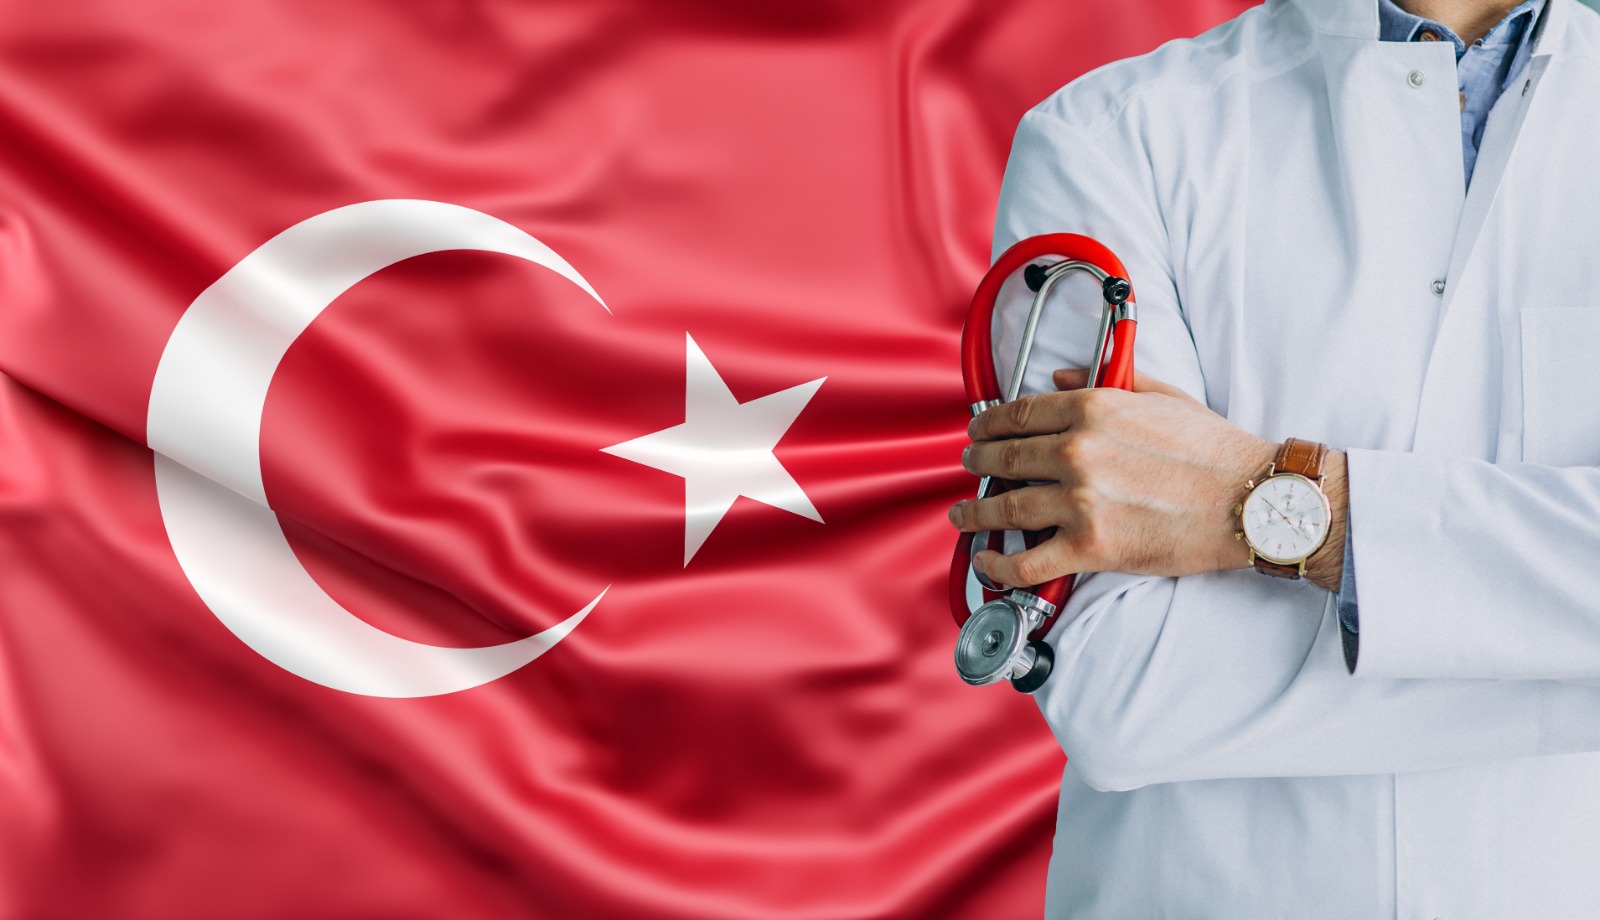 Growth of healthcare and medical field in Turkey